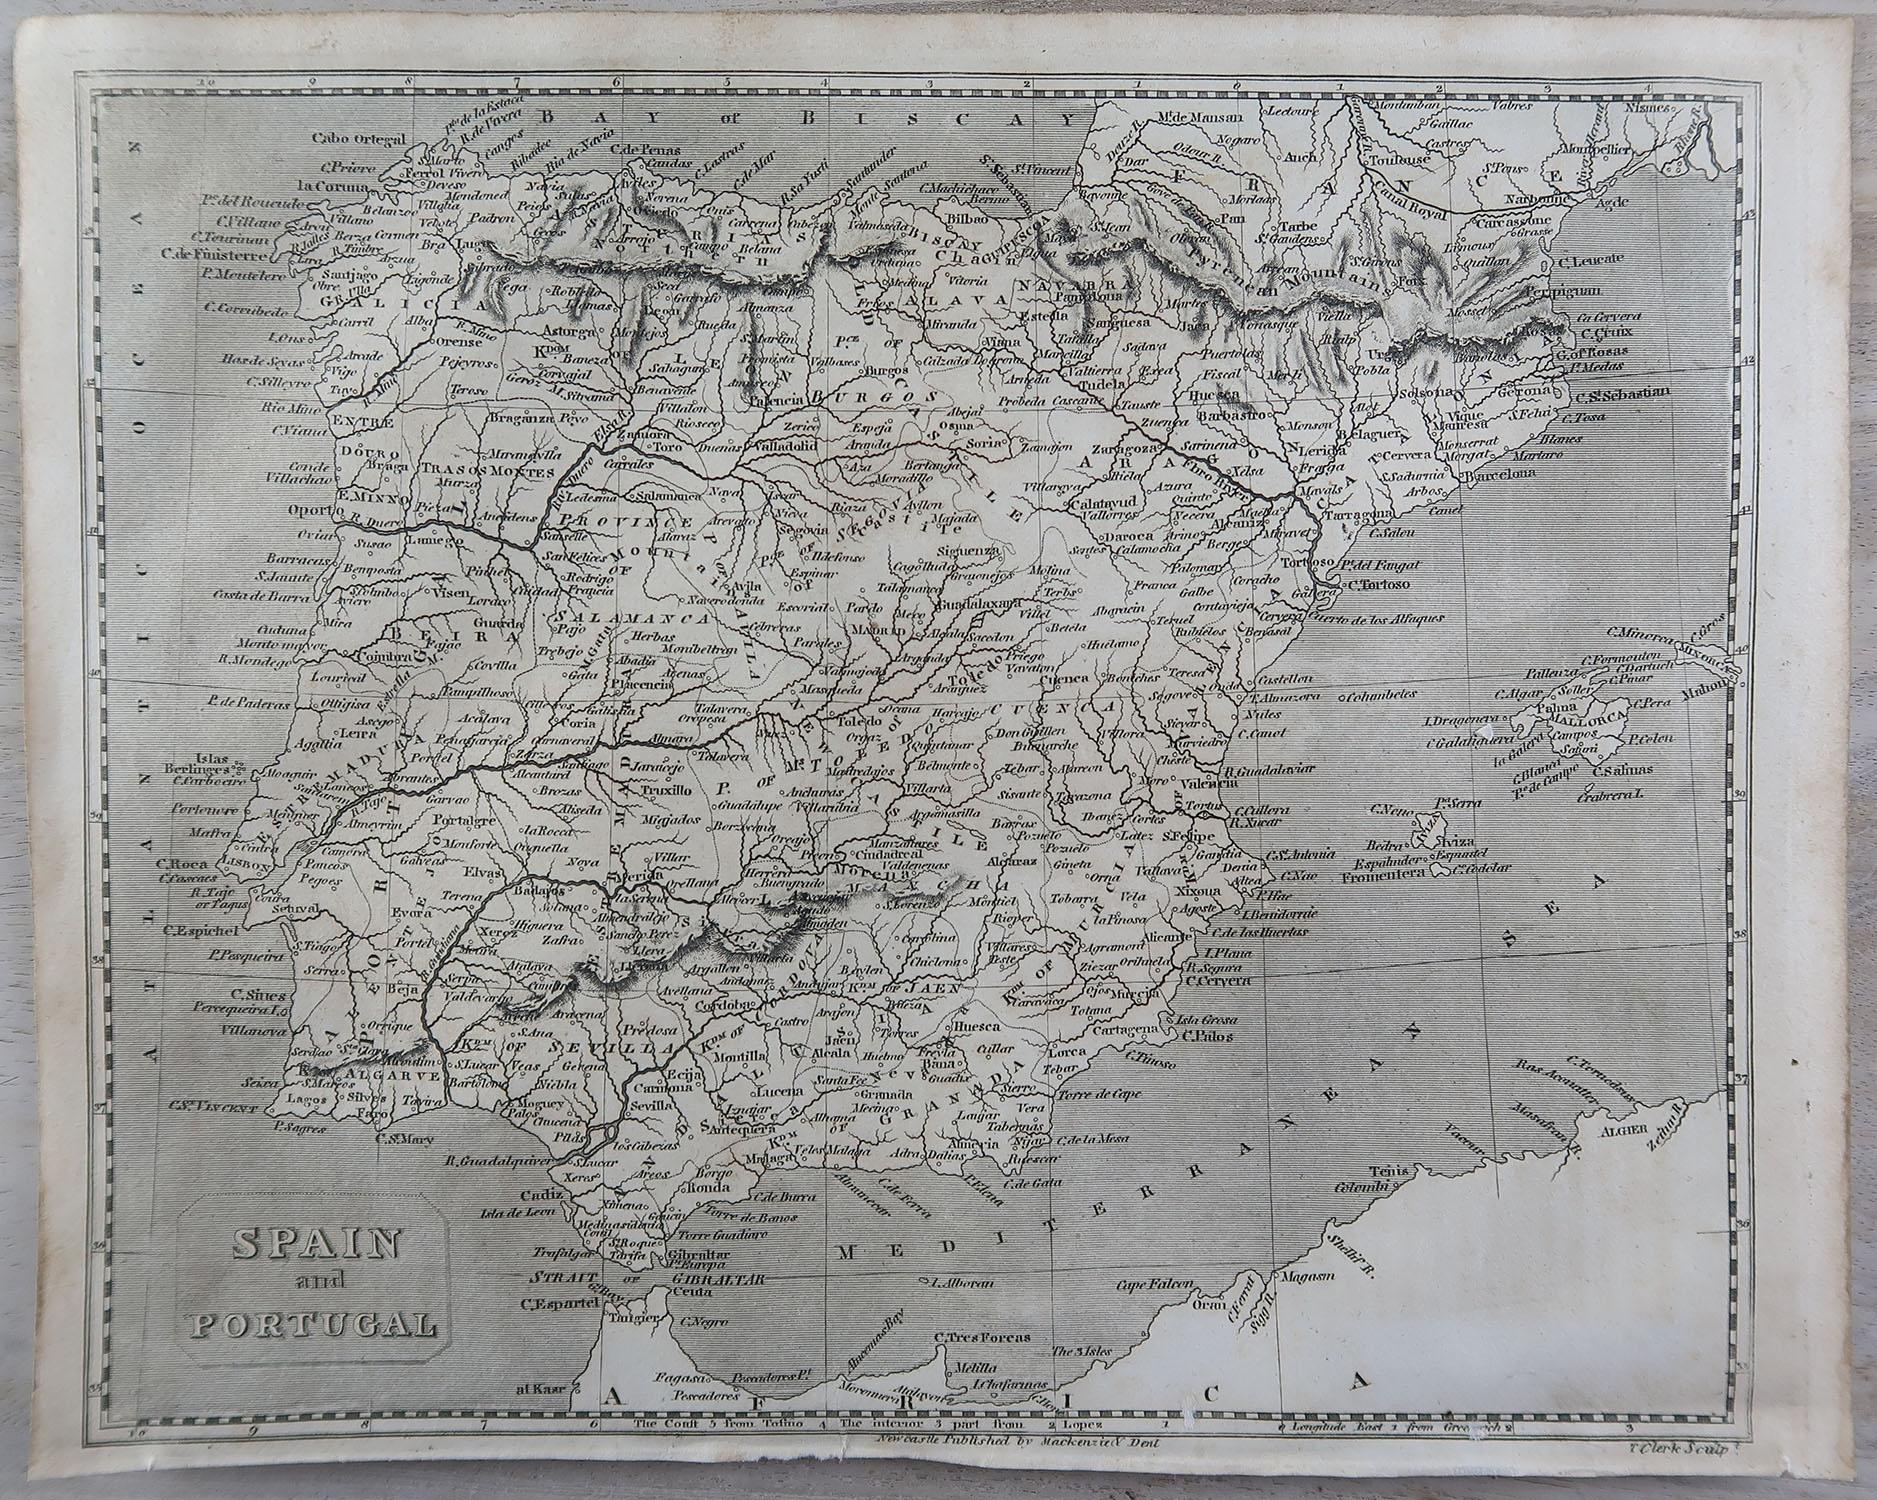 Great map of Spain and Portugal

Copper-plate engraving

Drawn and engraved by Thomas Clerk, Edinburgh.

Published by Mackenzie And Dent, 1817

Unframed.